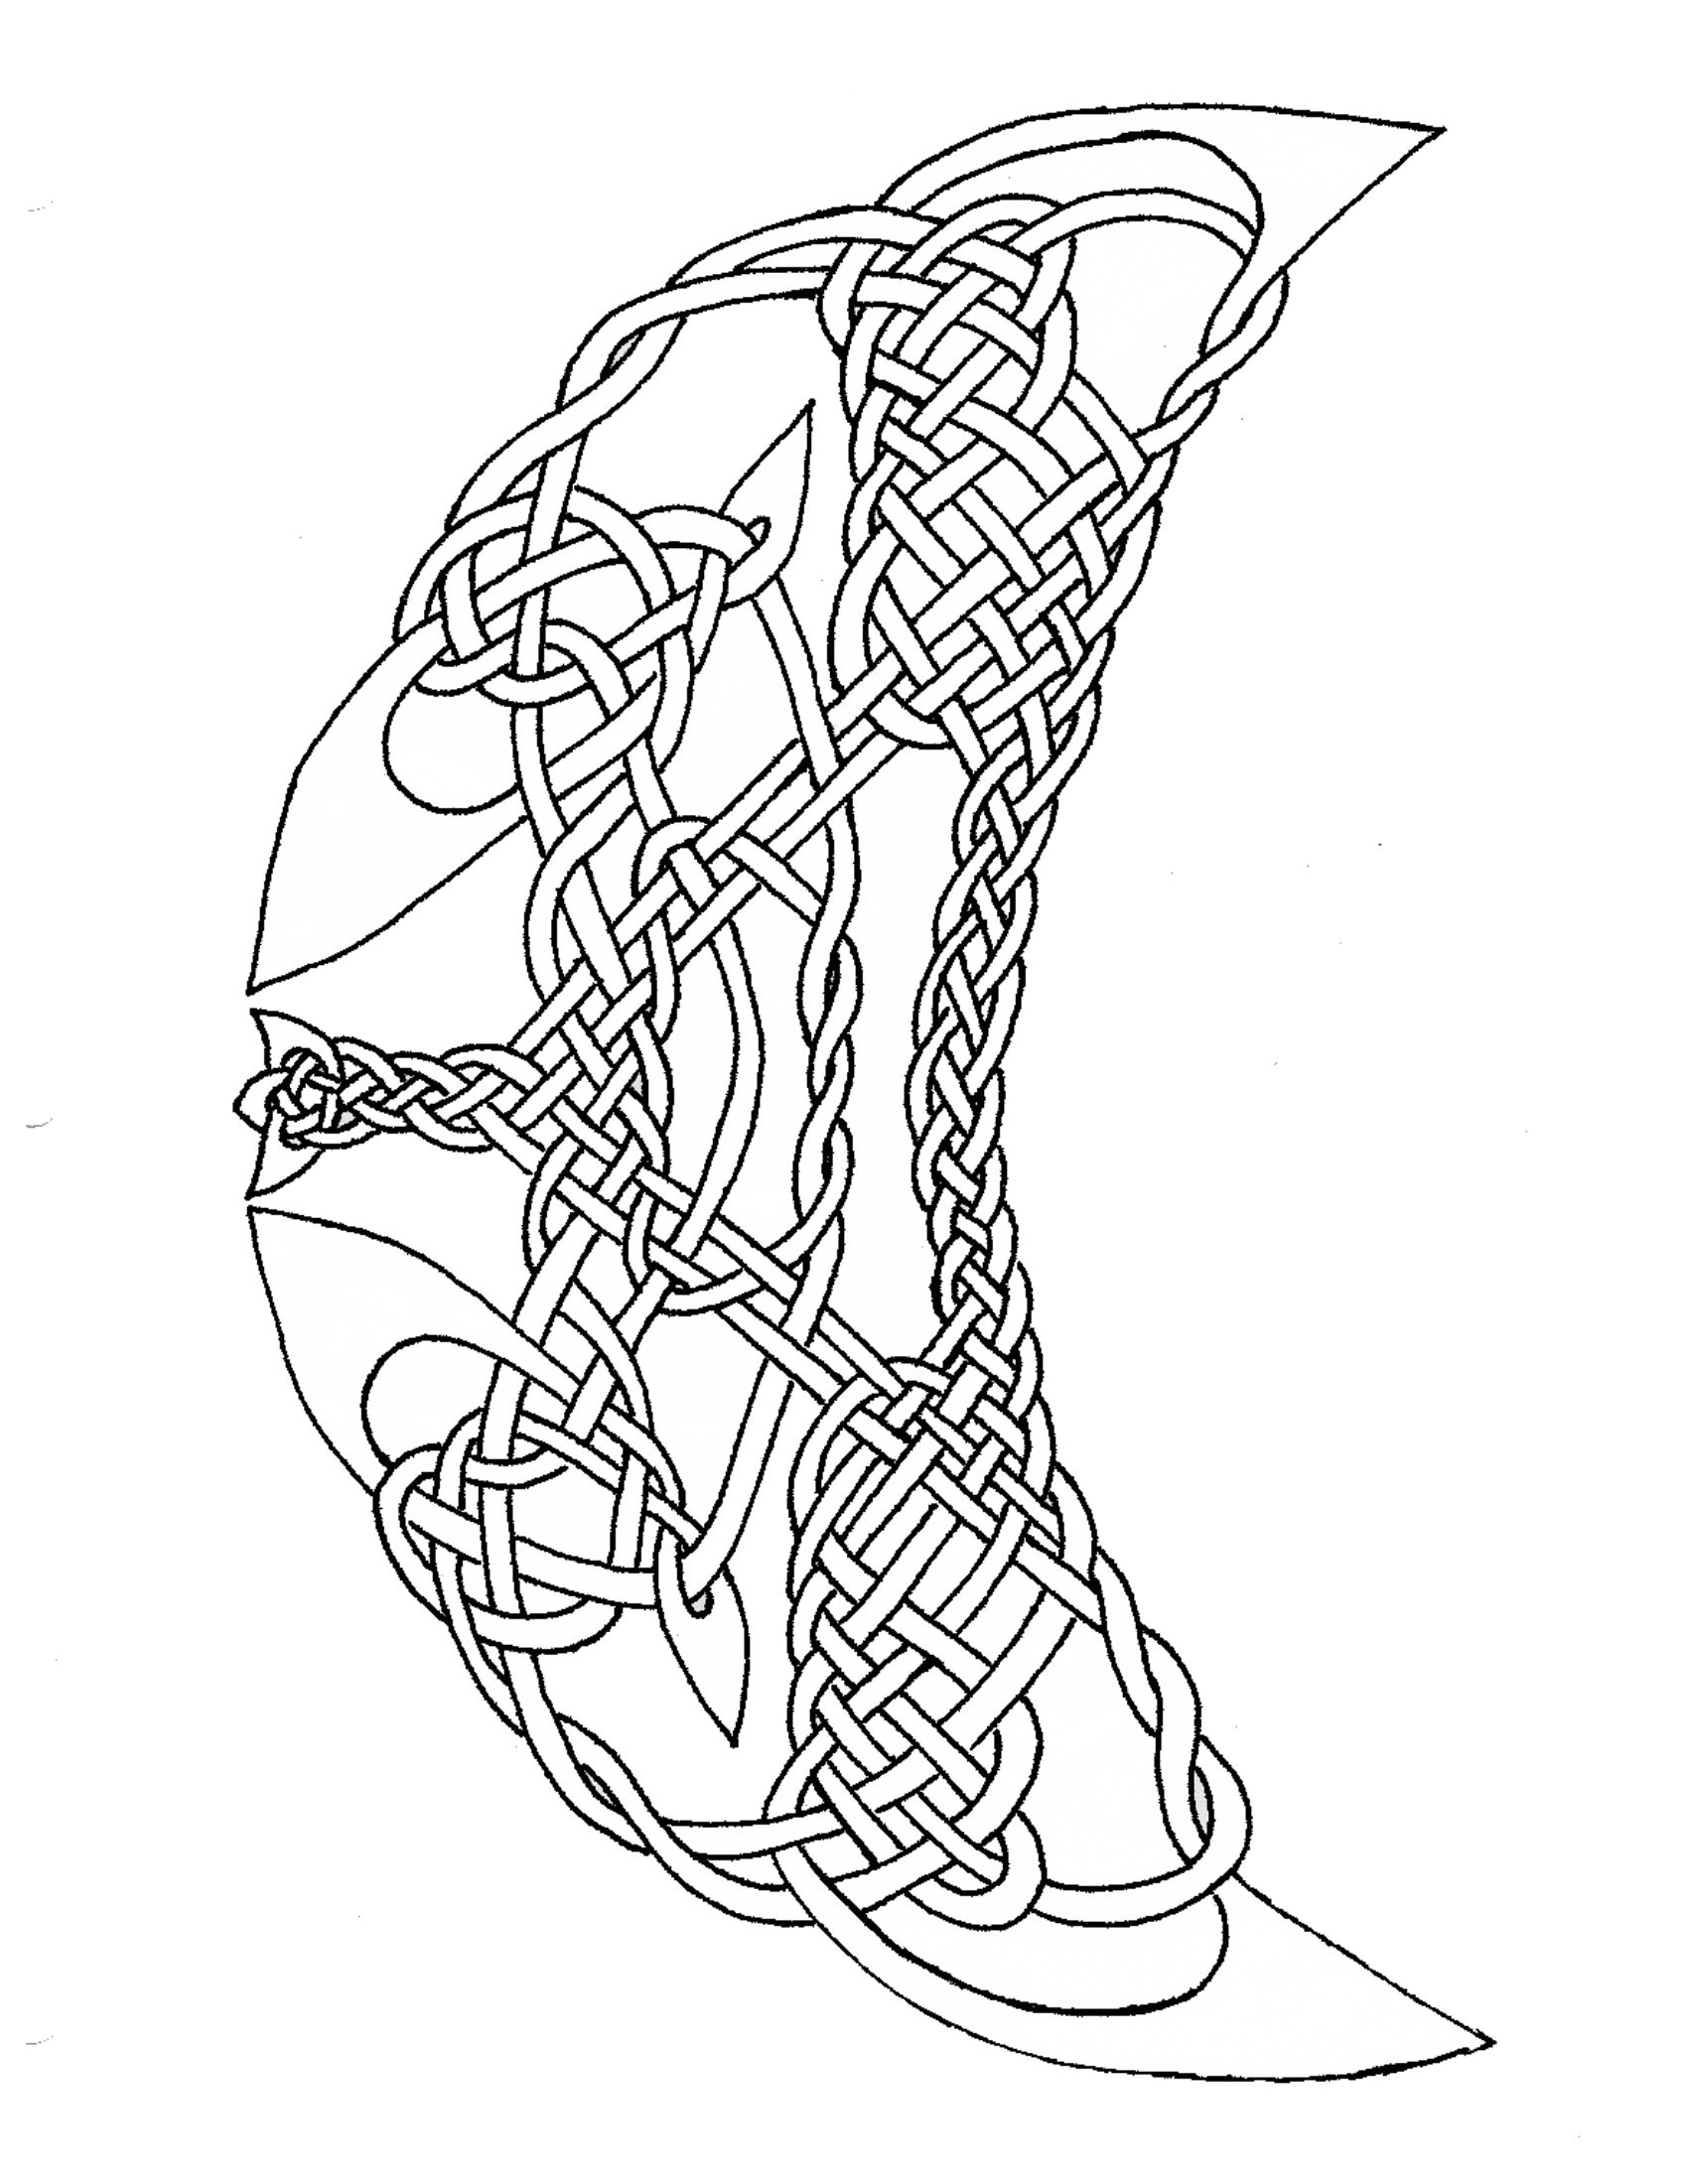 celtic coloring page